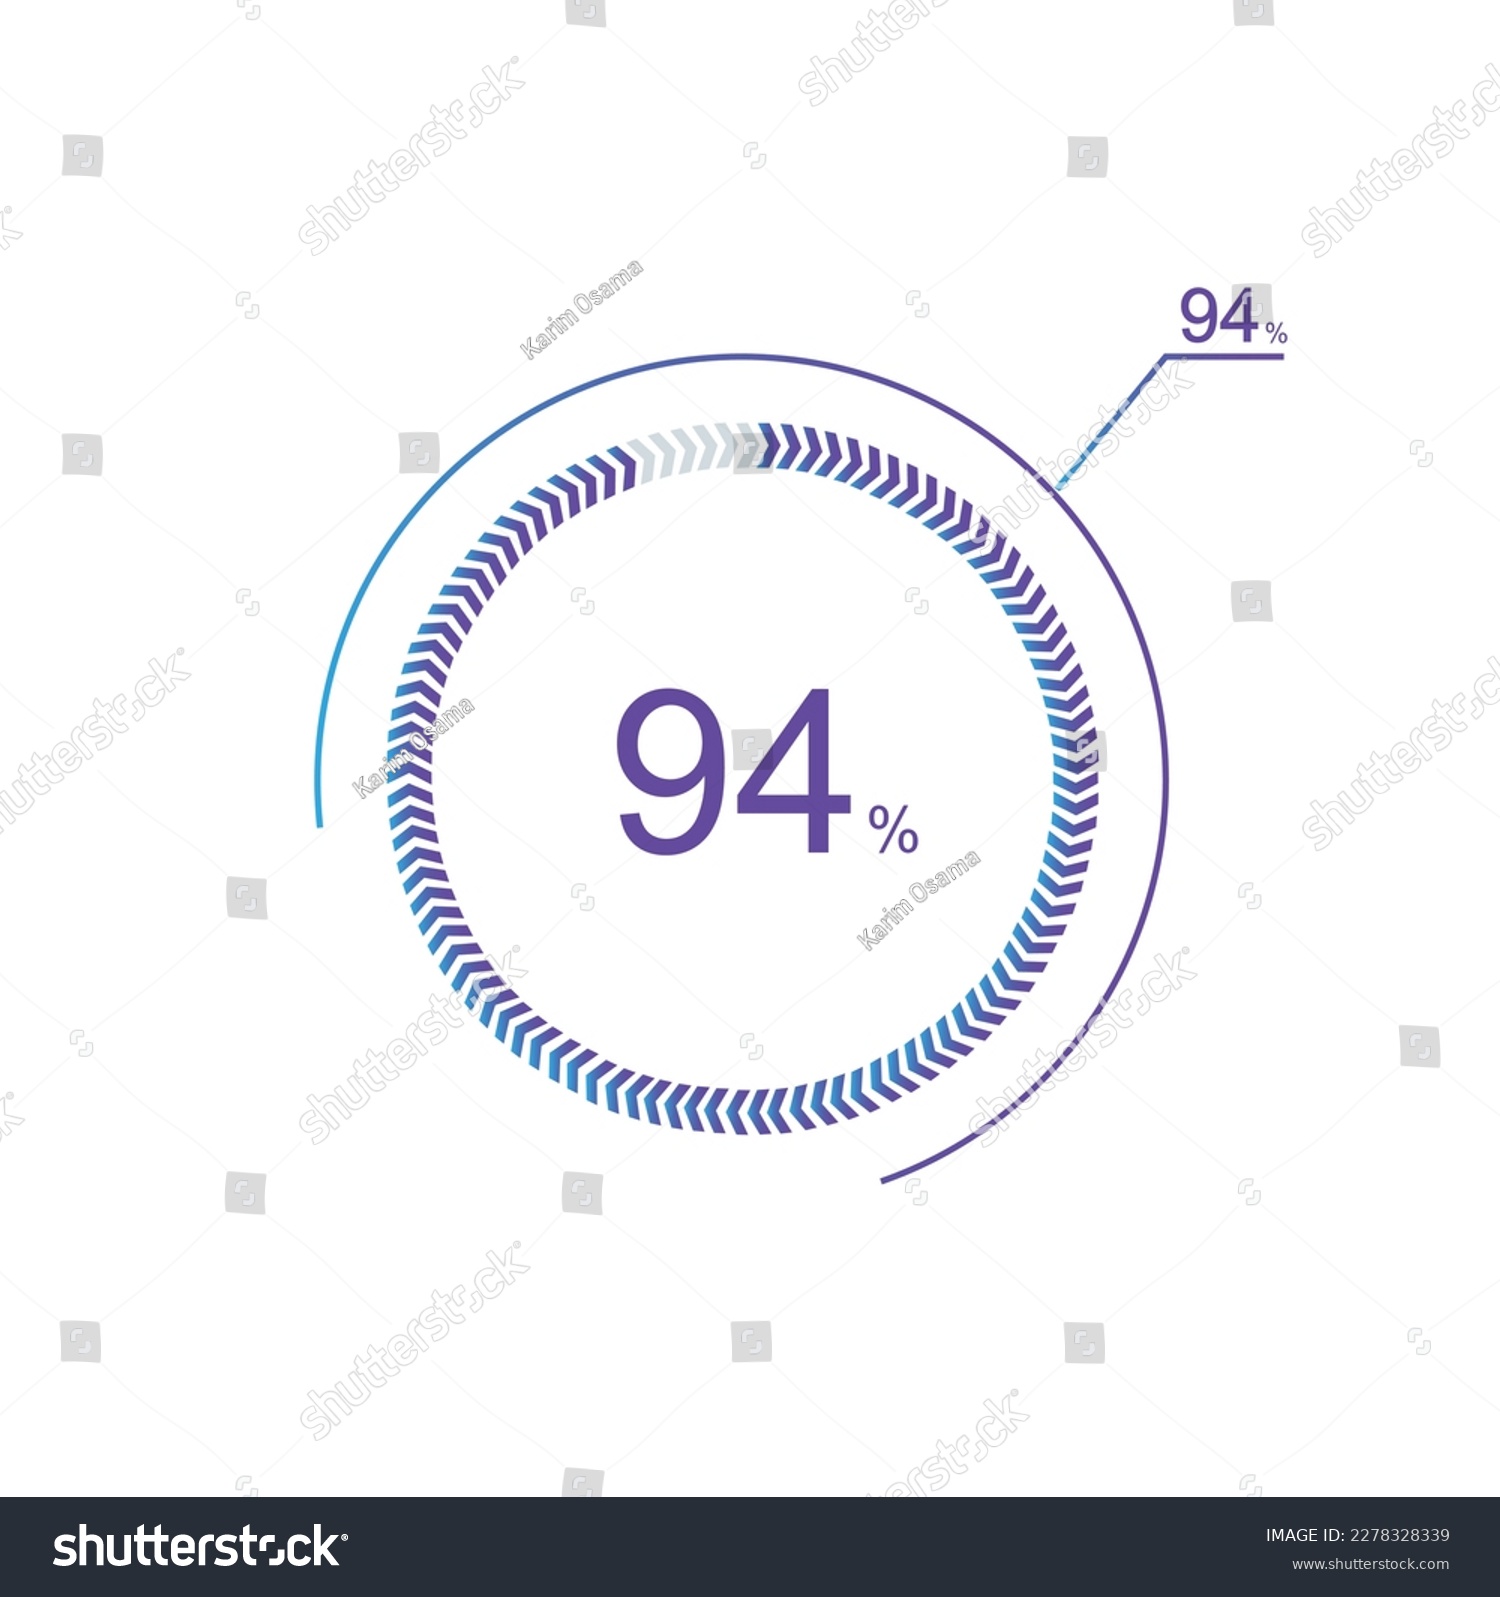 SVG of 94% percentage infographic circle icons, 94 percents pie chart infographic elements for Illustration, business, web design. svg